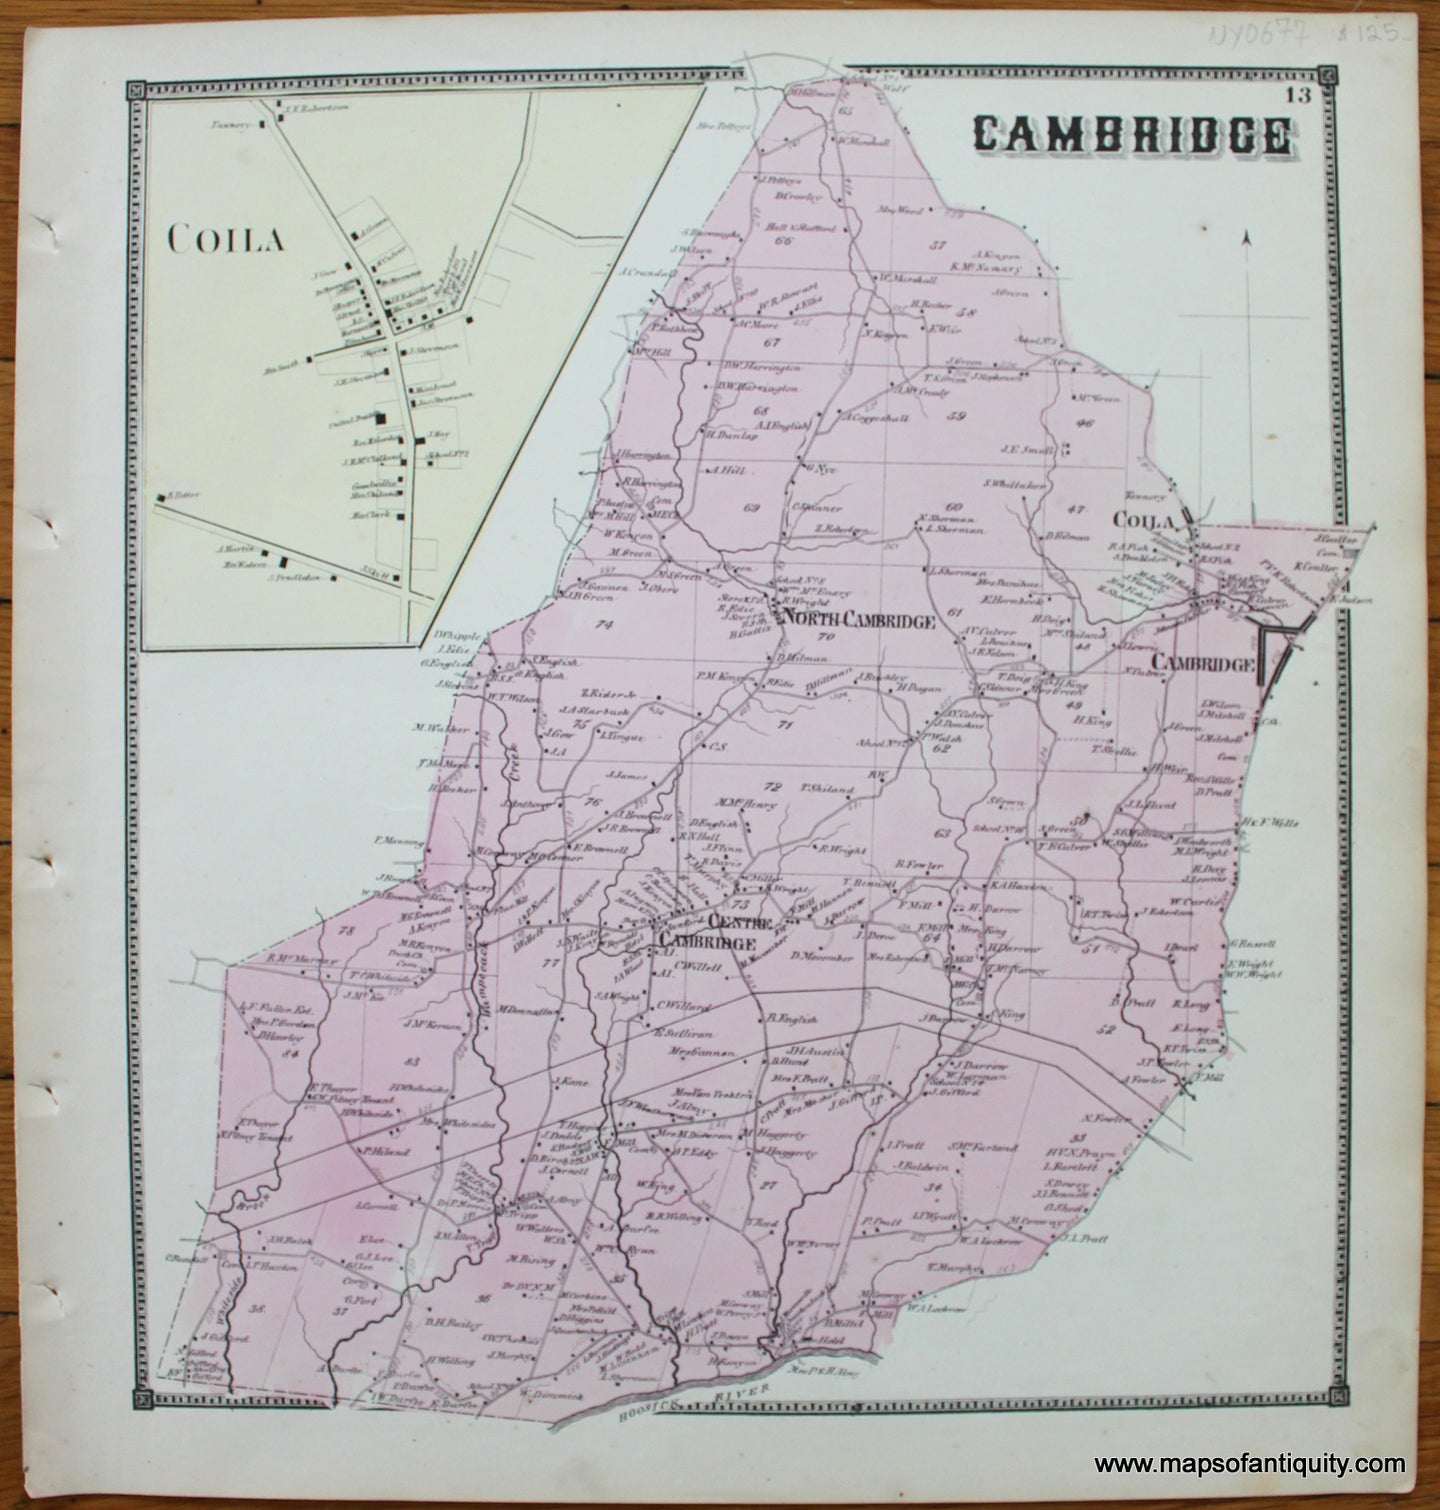 Antique-Map-Town-Towns-Cambridge-Coila-New-Topographical-Atlas-of-Washington-County-New-York-by-Stone-and-Stewart-1866-1860s-1800s-Mid-Late-19th-Century-Maps-of-Antiquity-